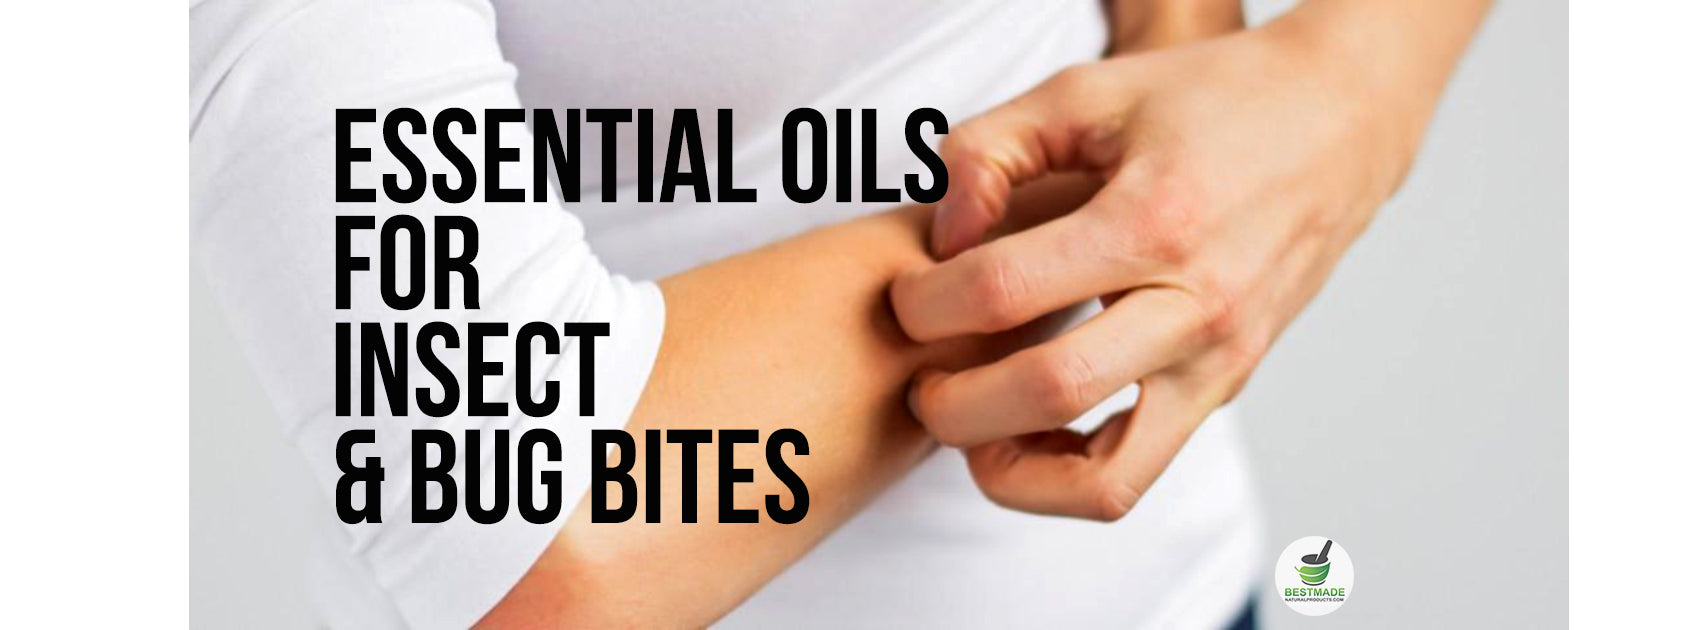 Essential Oils For Insect and Bug Bites